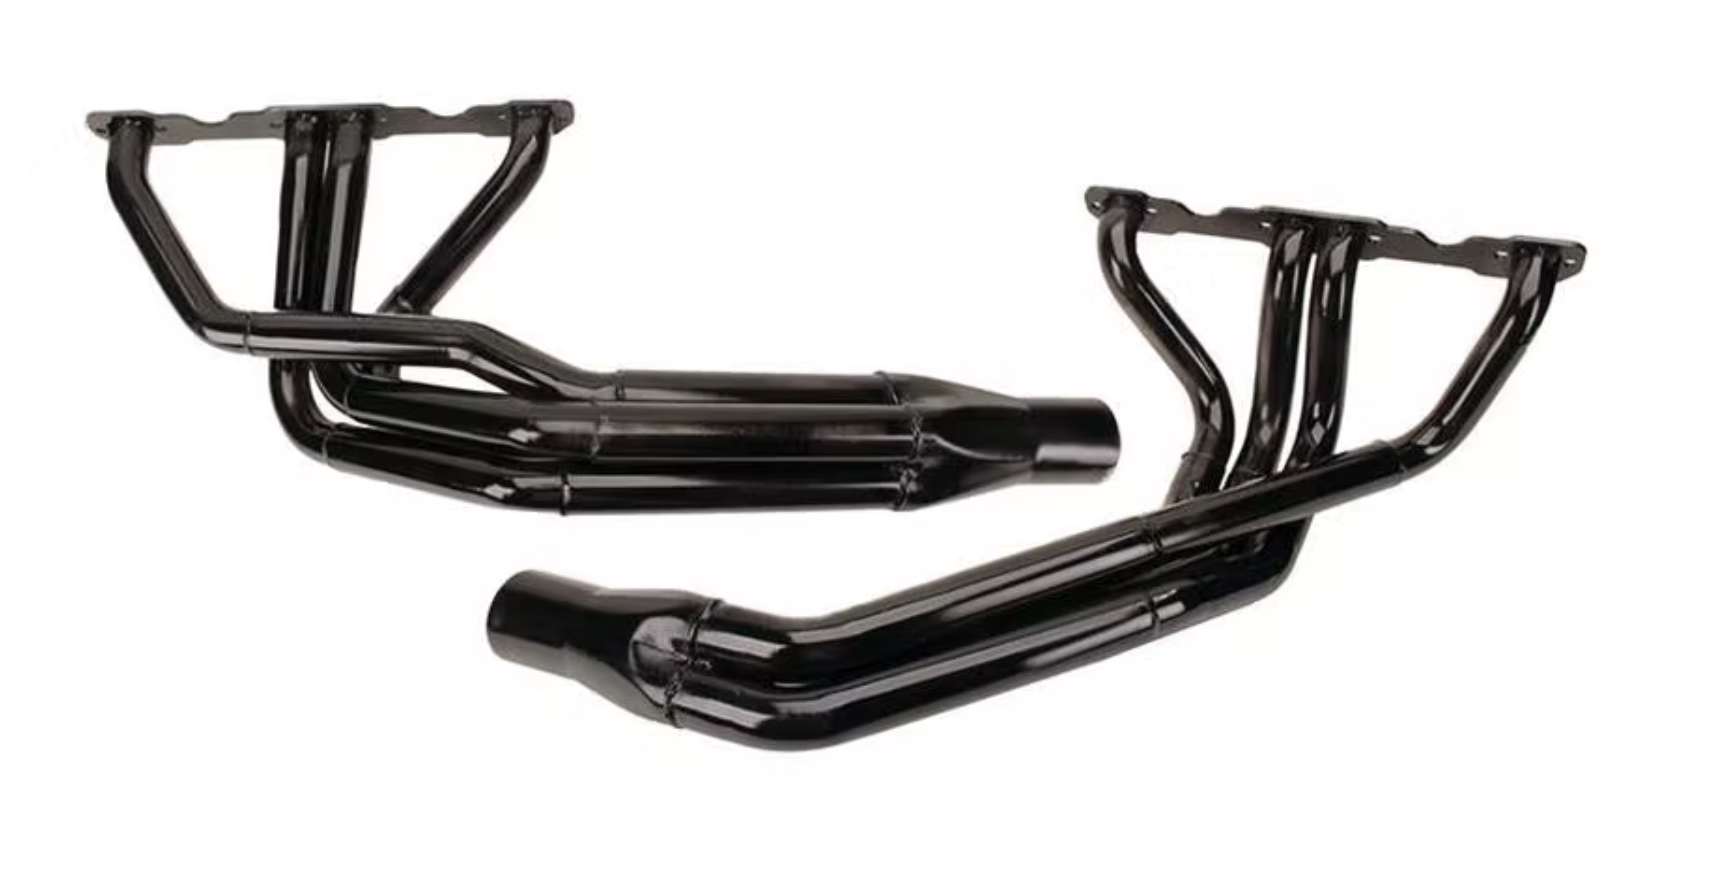 Schoenfeld Headers 1155LBVCM-3 Headers, Long Tube, 1-5/8 to 1-3/4 in Primary, 3 in Collector, Steel, Black Paint, Small Block Chevy, Pair